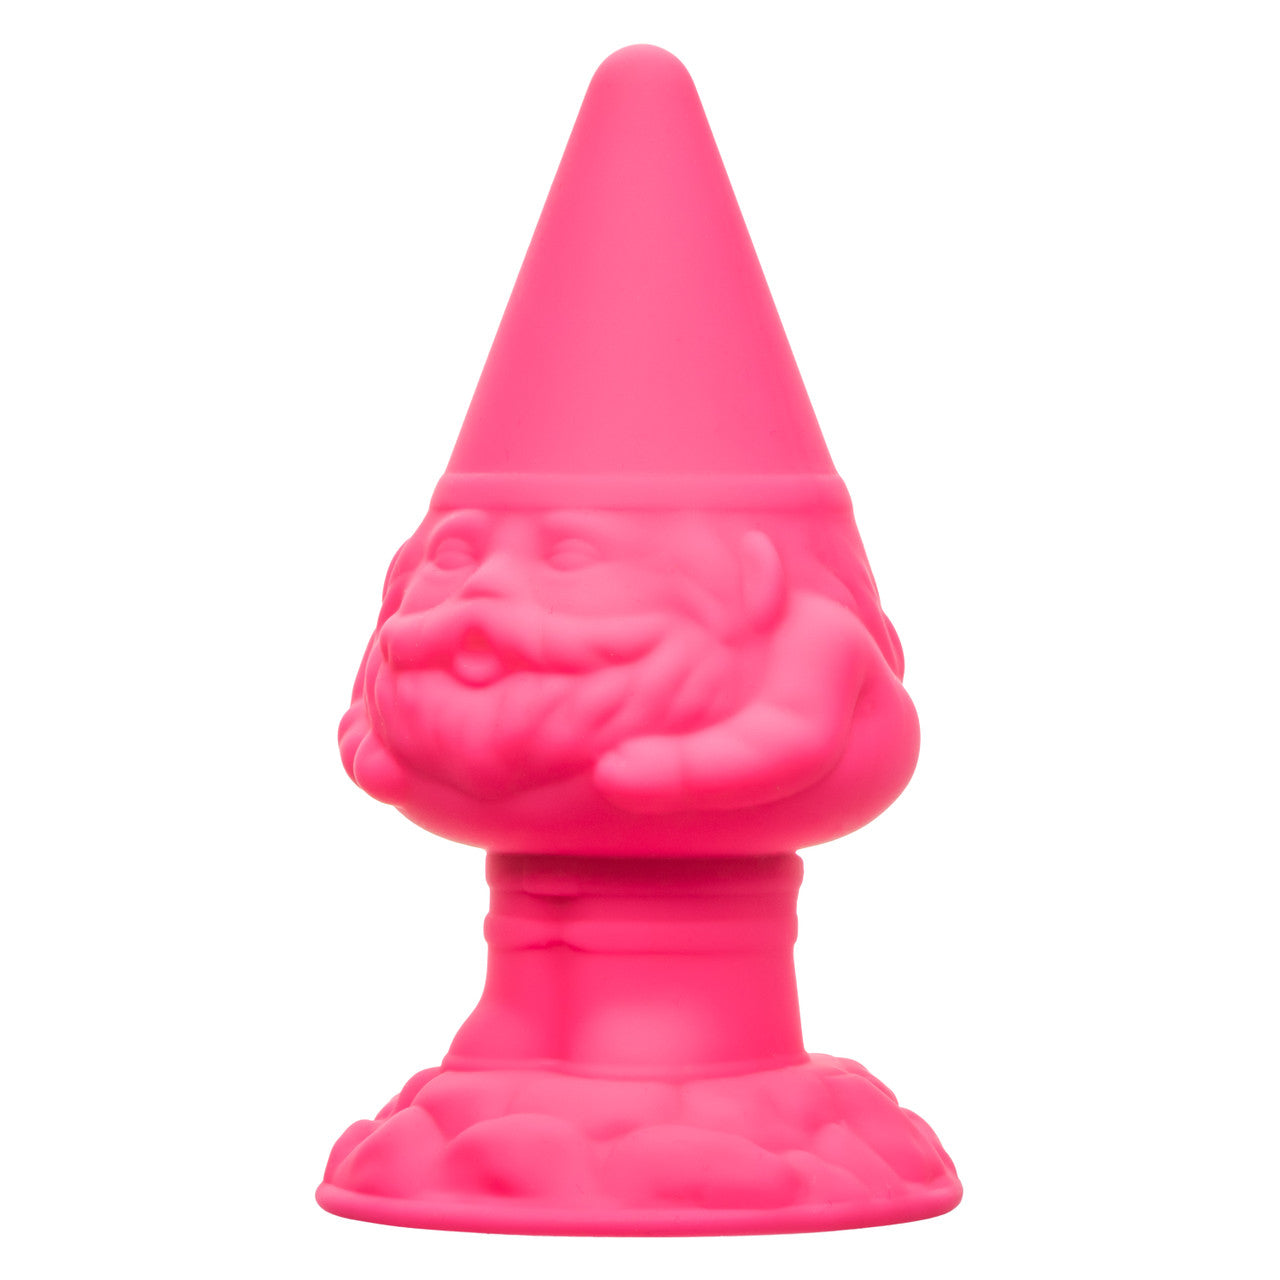 Naughty Bits Anal Gnome Gnome Butt Plug - Thorn & Feather